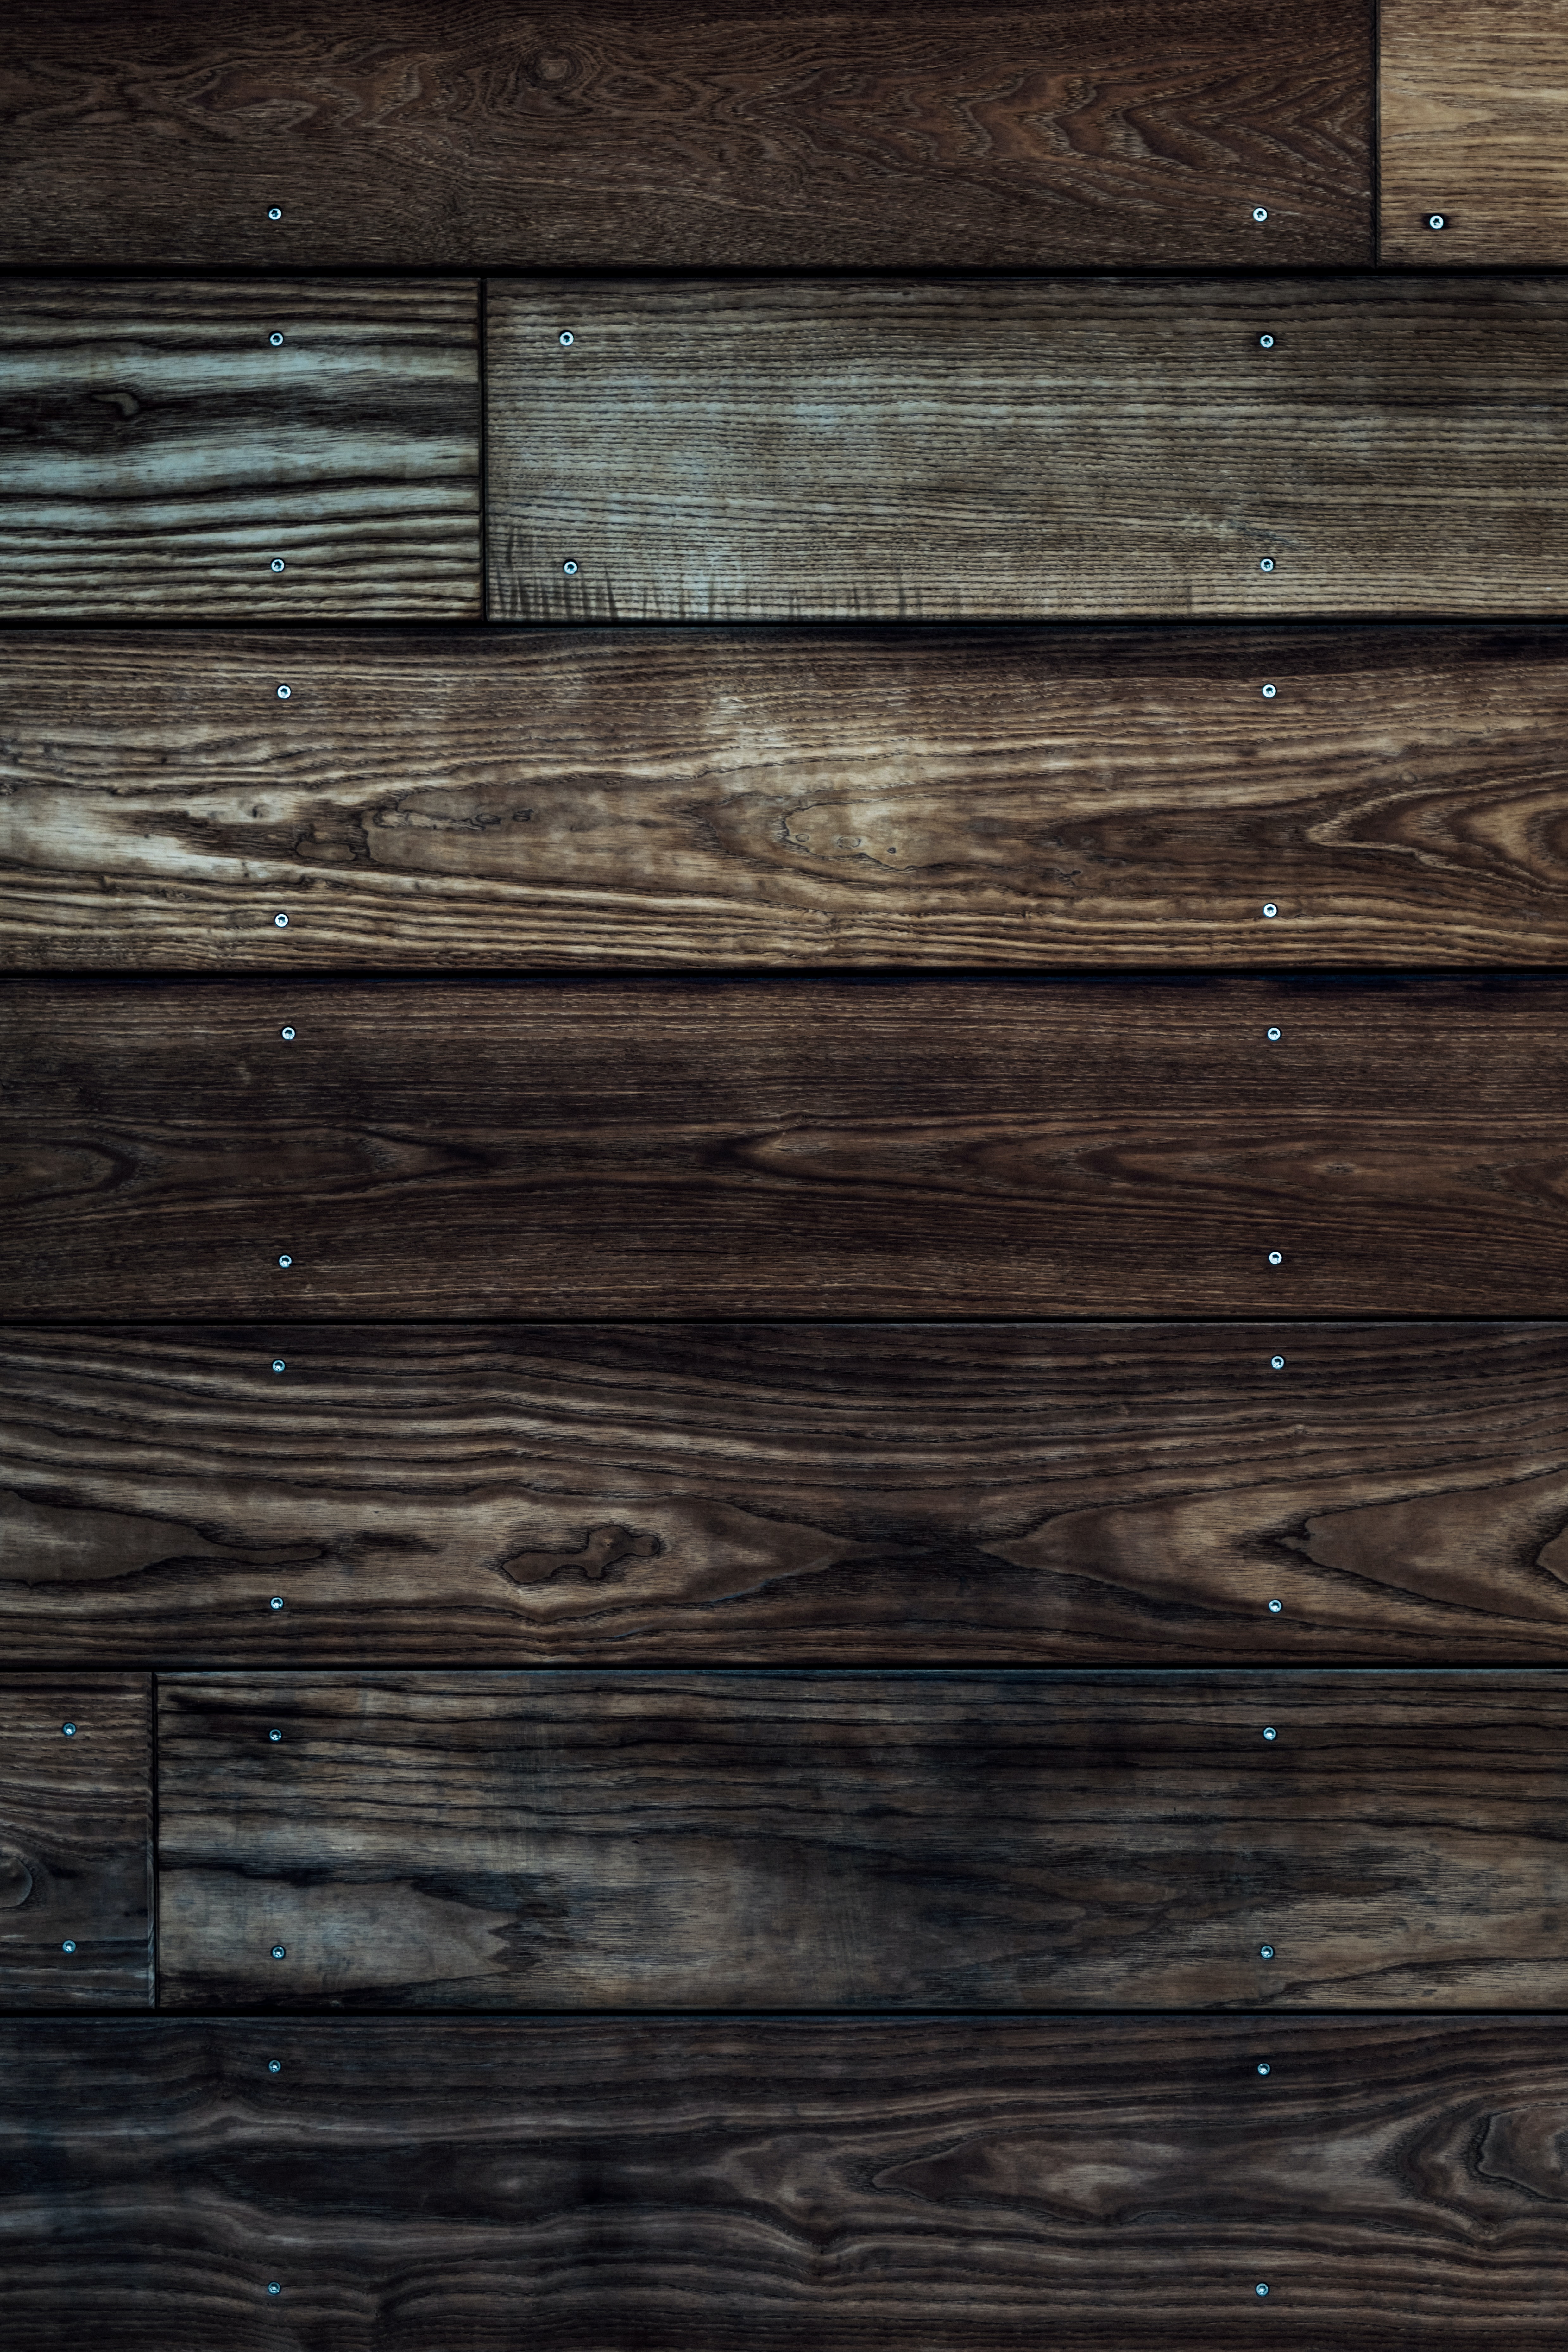 Download background surface, wood, wooden, texture, textures, planks, board